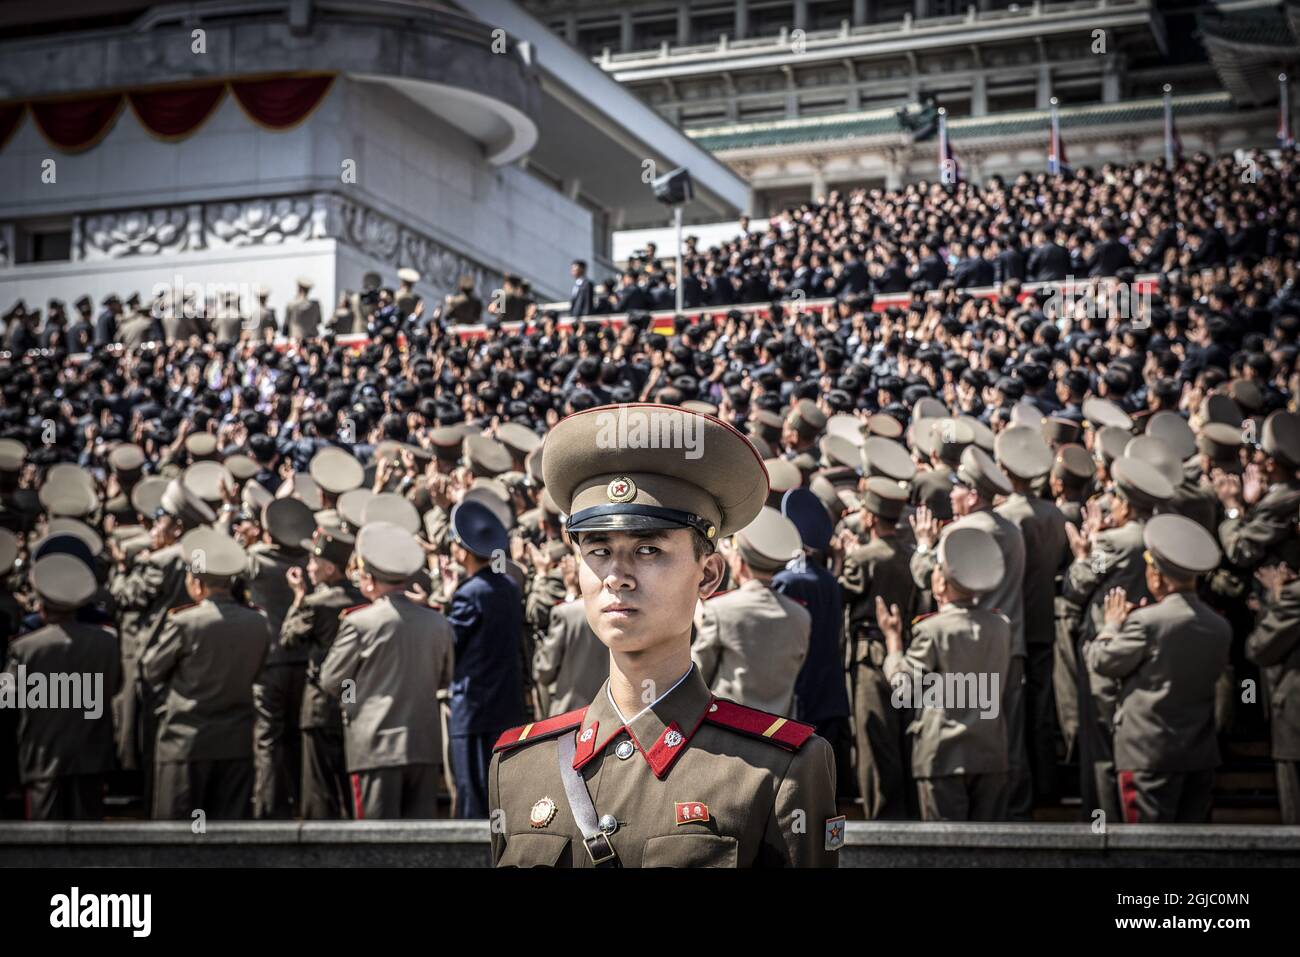 Military parade during North Korea's 70 year anniversary in Pyong Yang Foto: Yvonne Asell / SvD / TT / Kod: 30202 Stock Photo